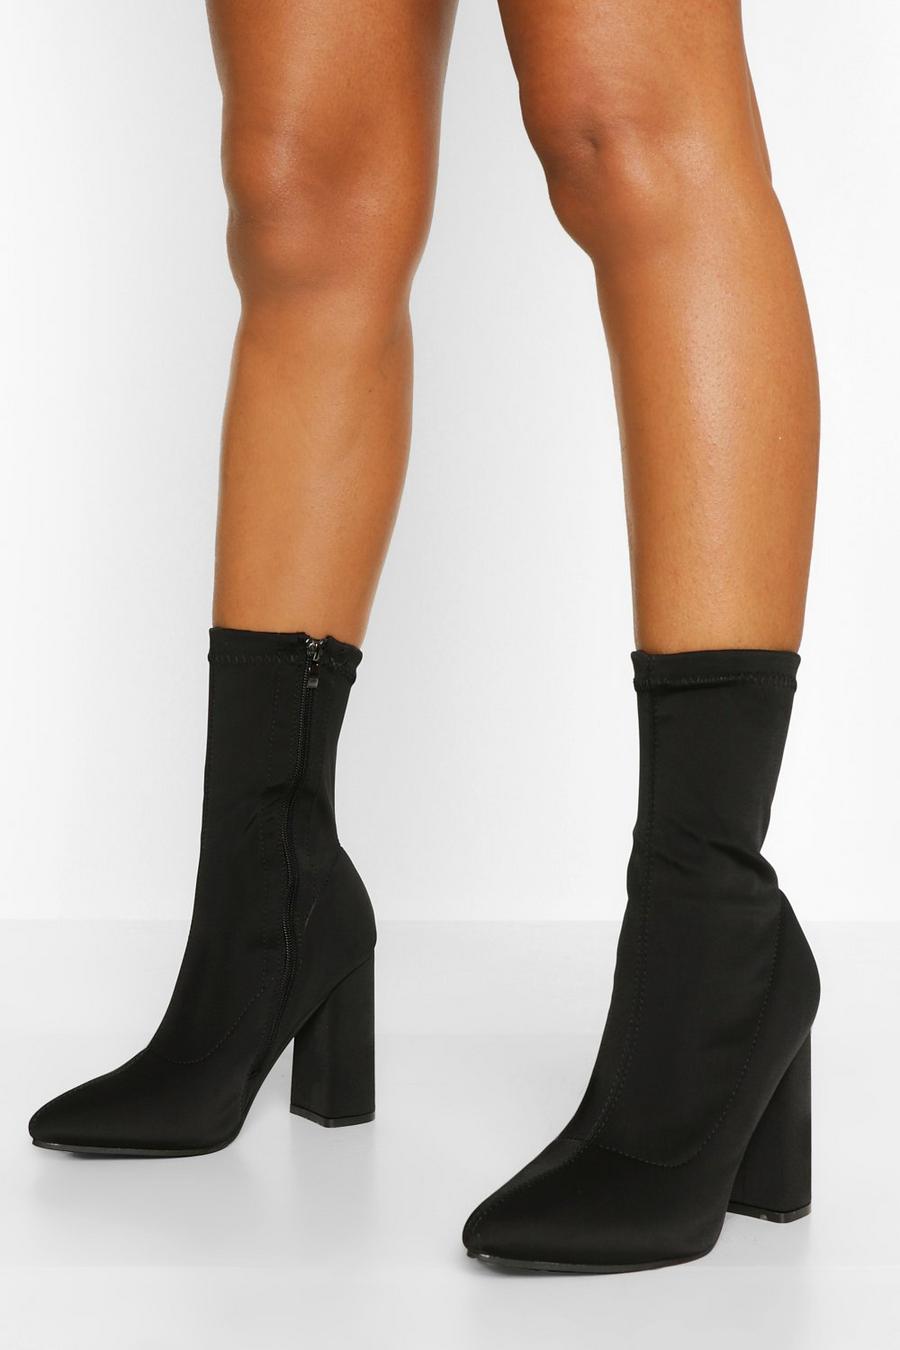 Black Wide Fit Block Heel Pointed Toe Sock Boots image number 1